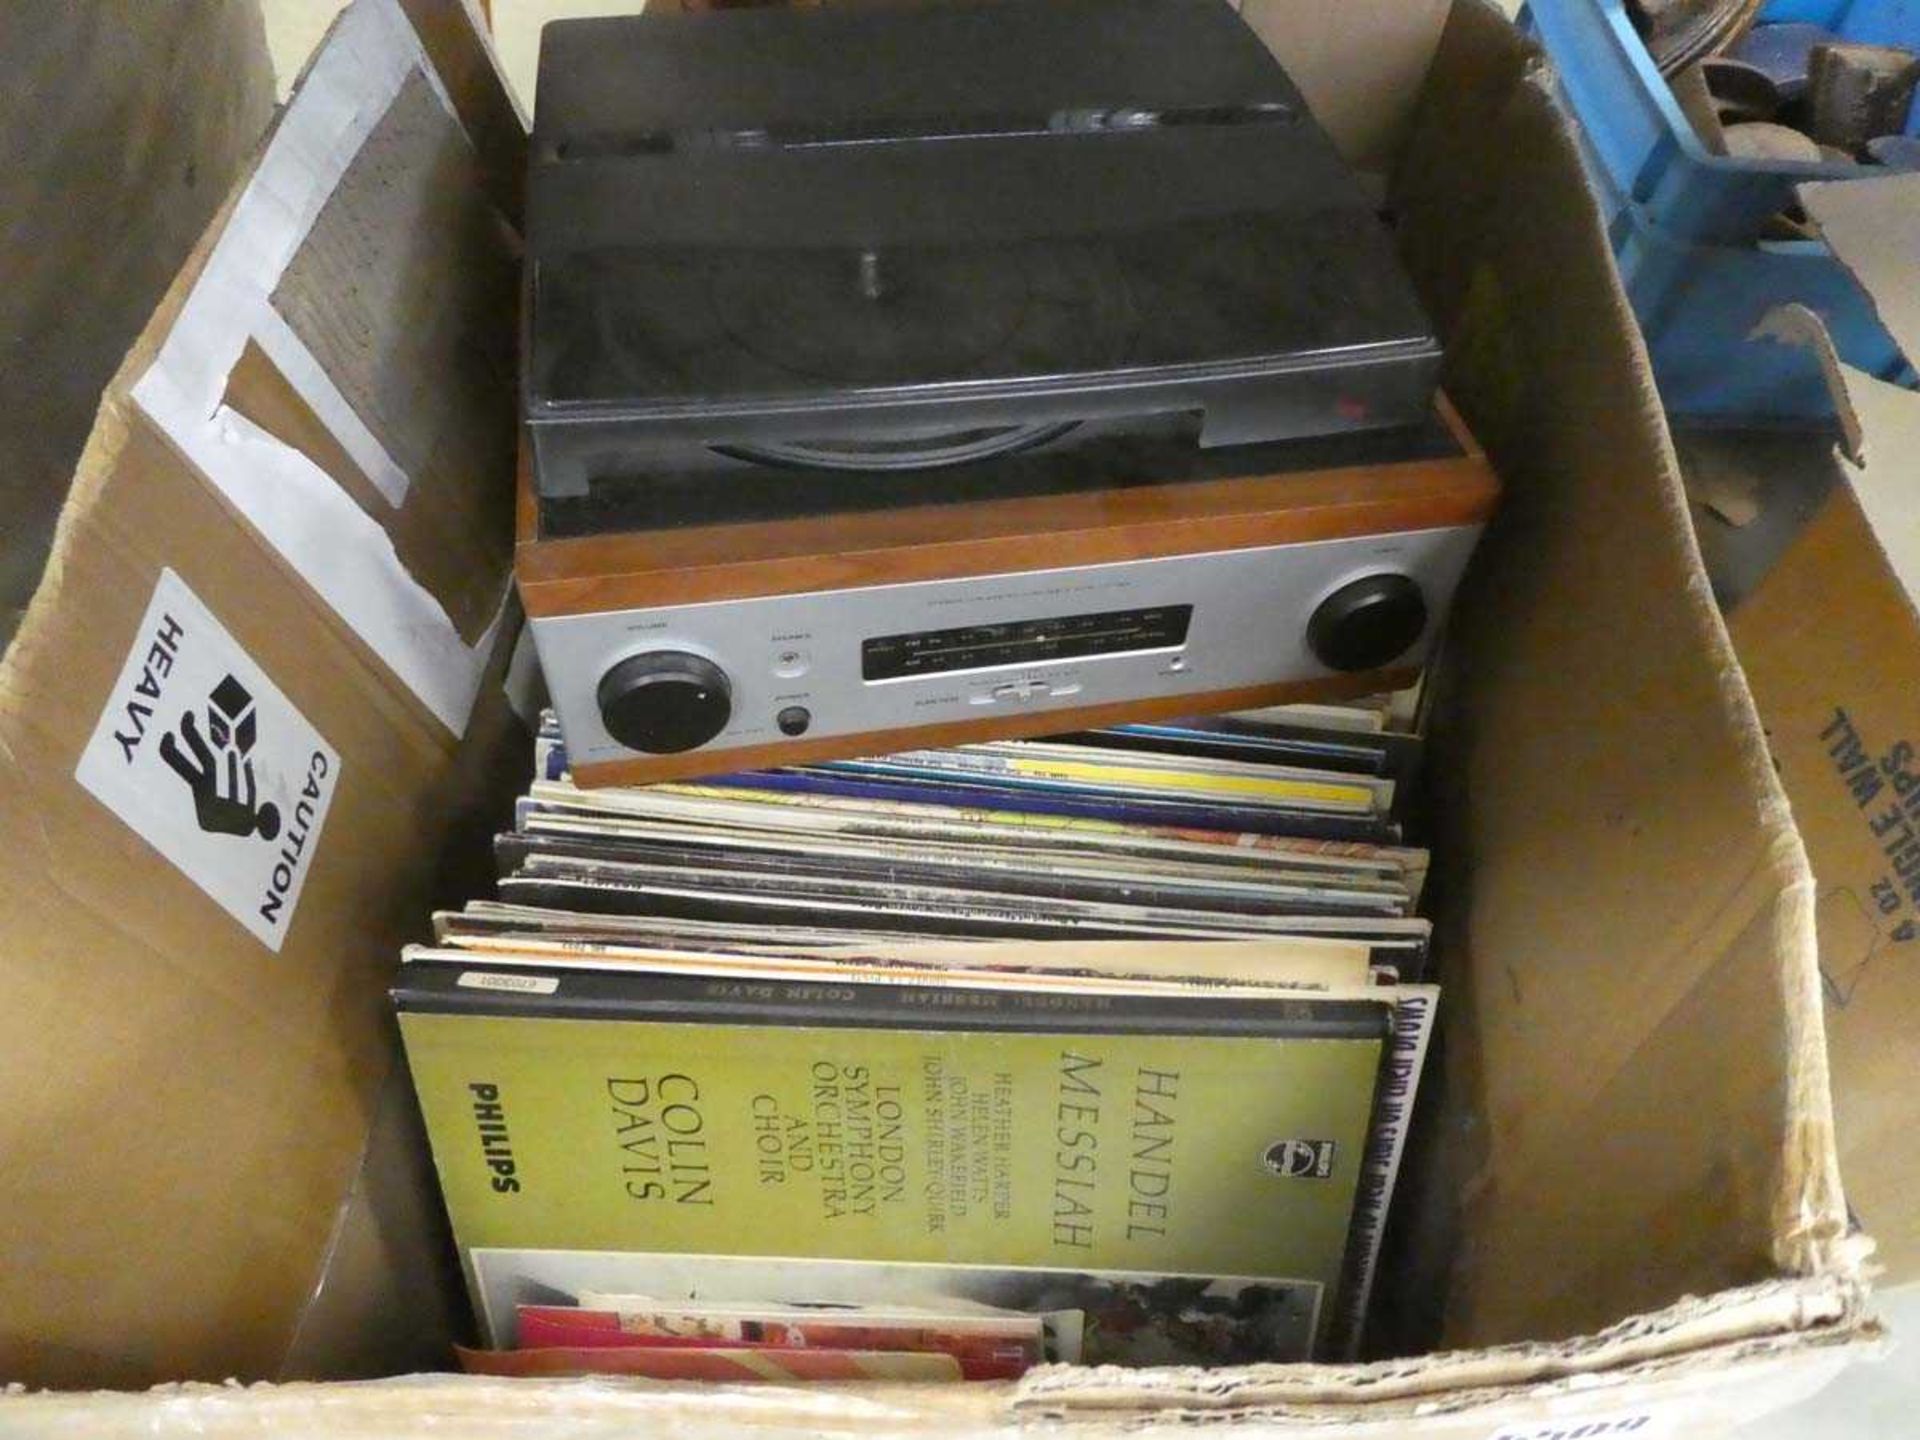 Box containing turntable and quantity of vinyl records